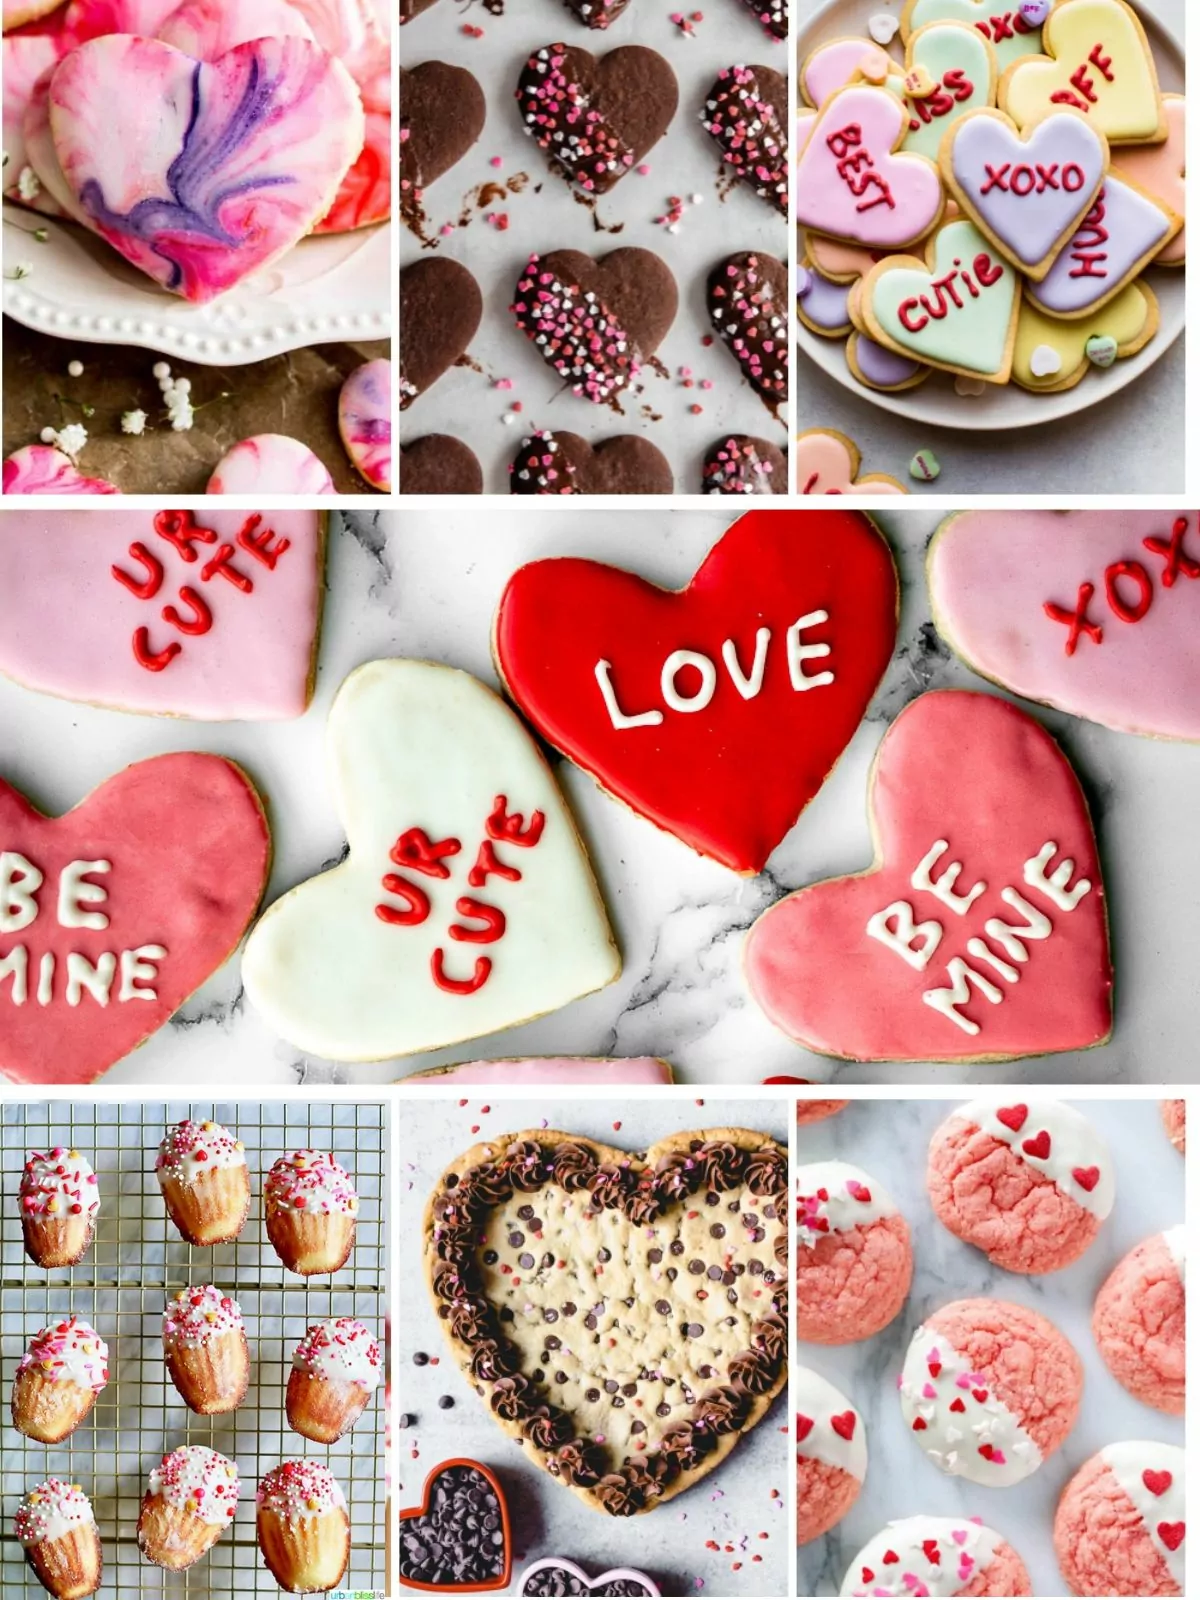 Delicious Valentine's Day cookies decorated with vibrant icing and sprinkles.